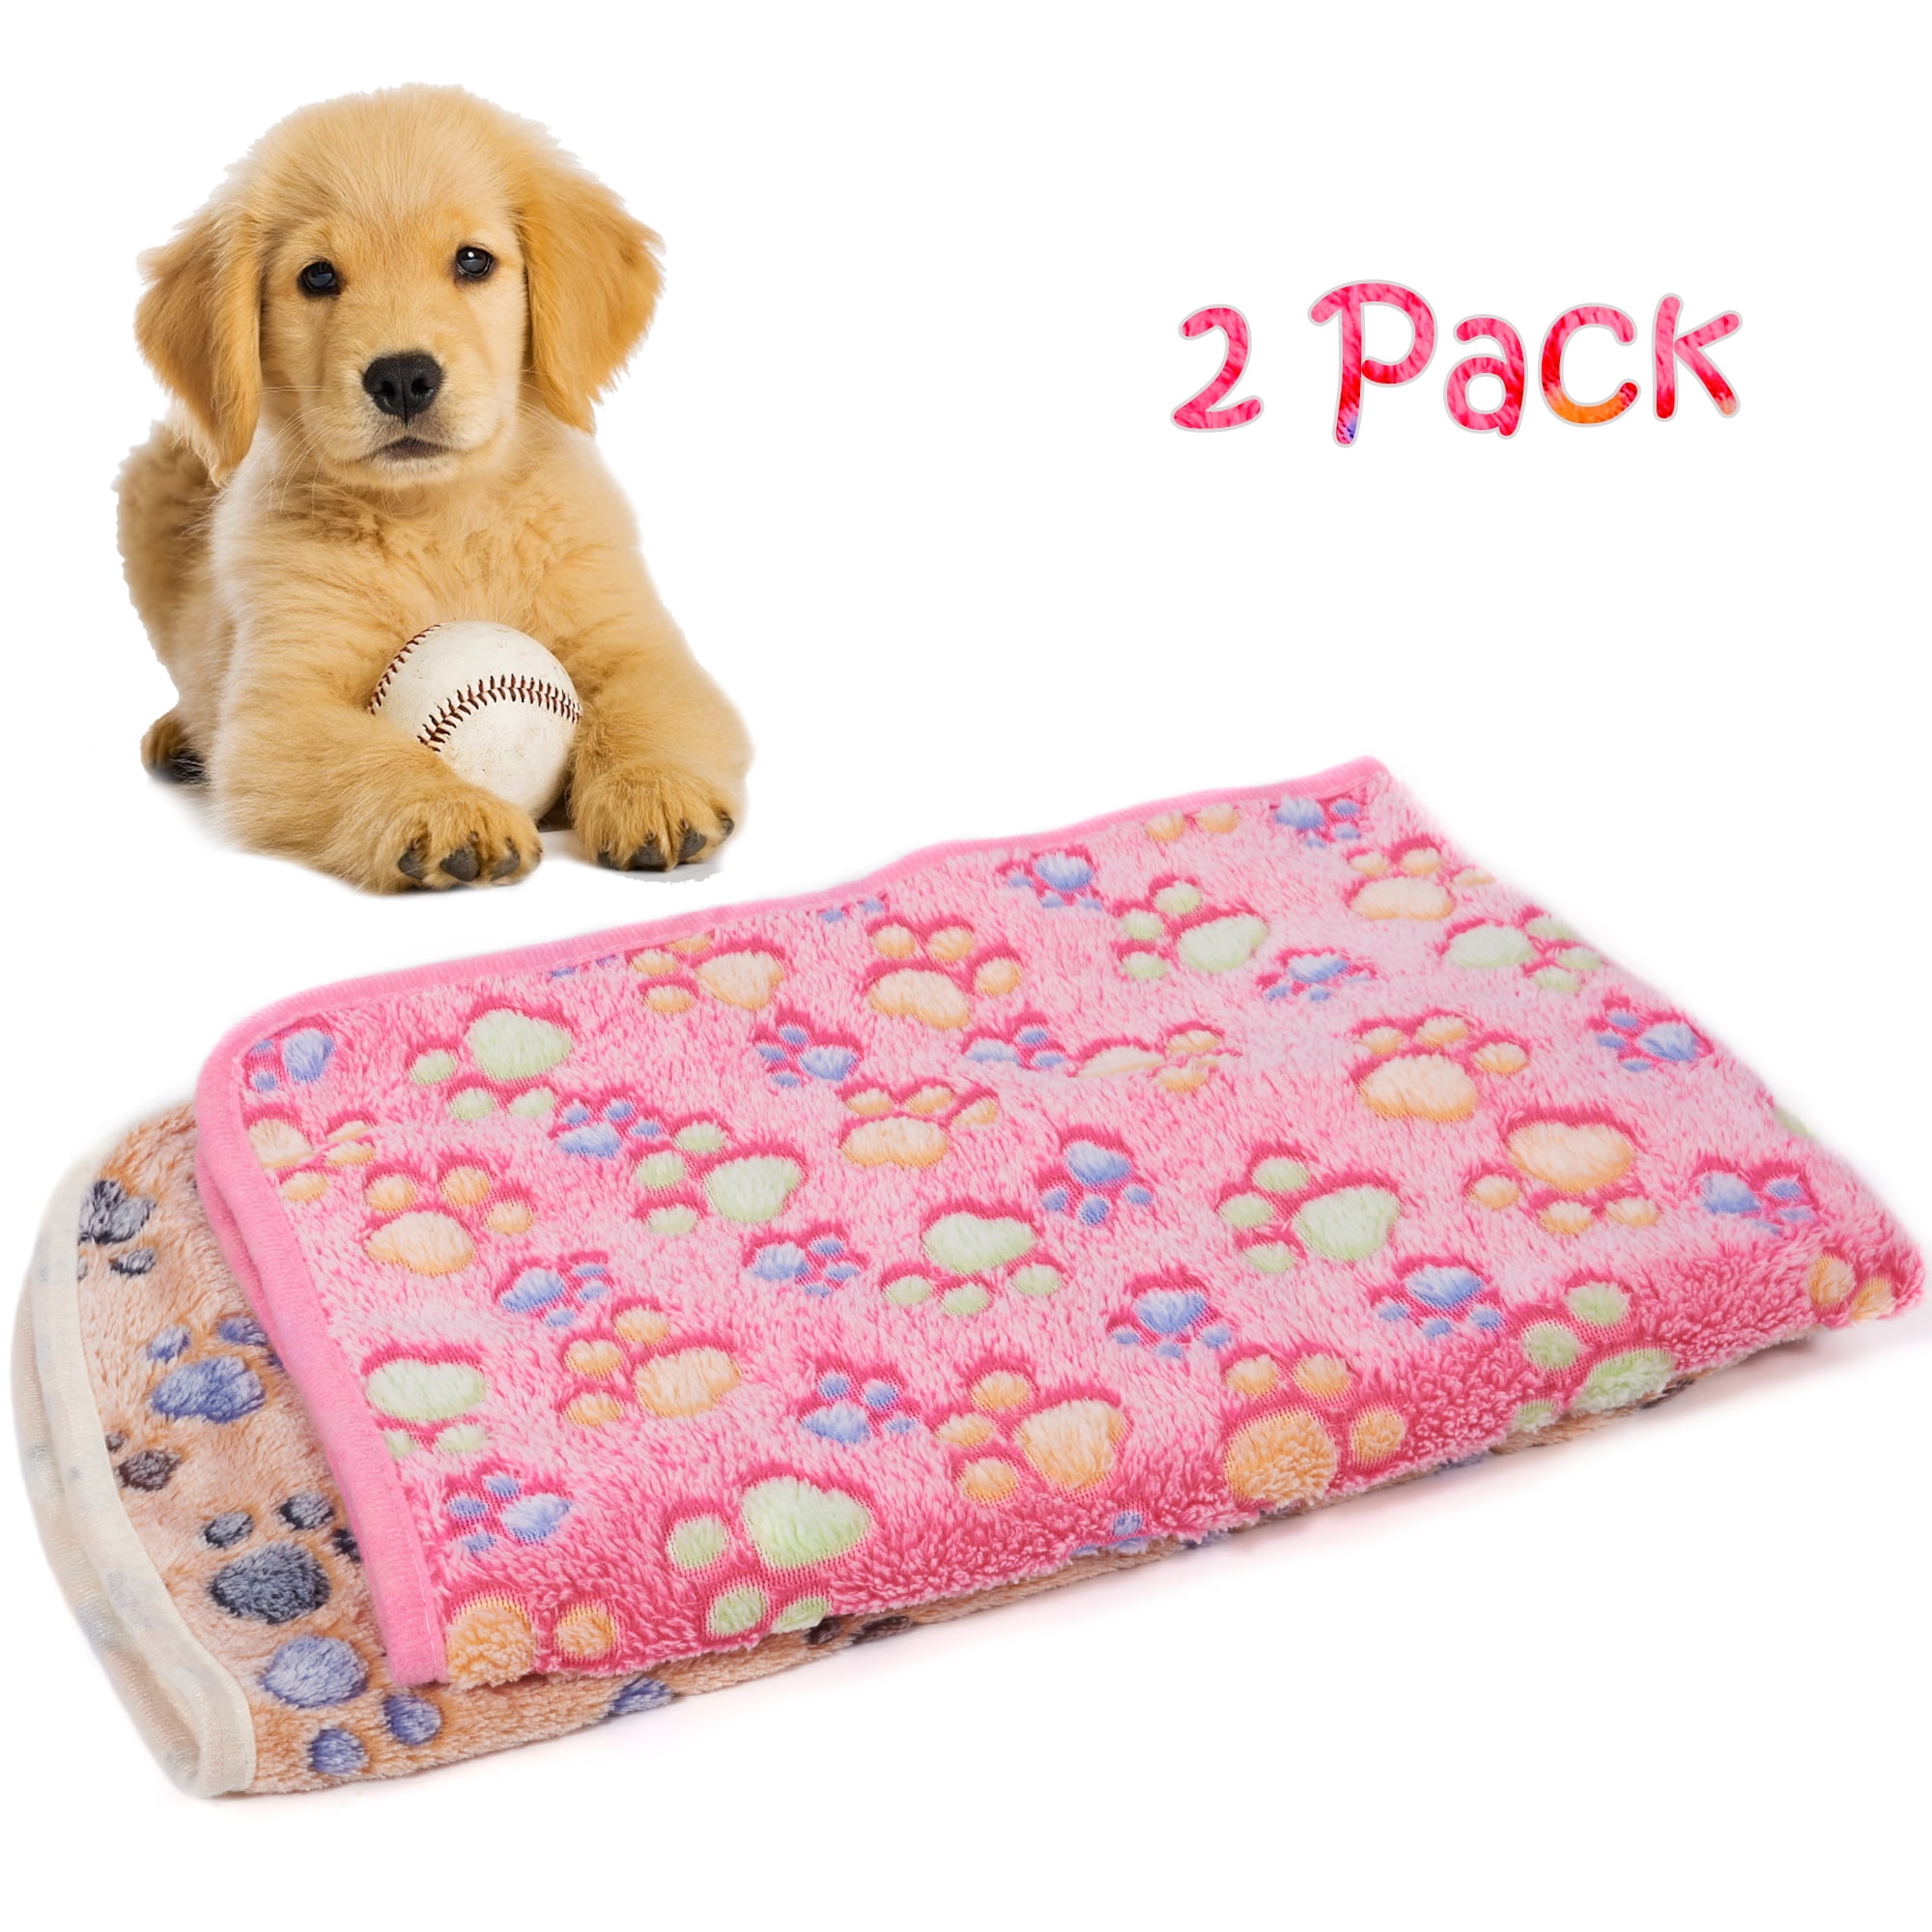 Pet Dog Blanket Cat Mat Puppy Sleeping Pad Flannel Cushion Wraps Soft Bed Cover 